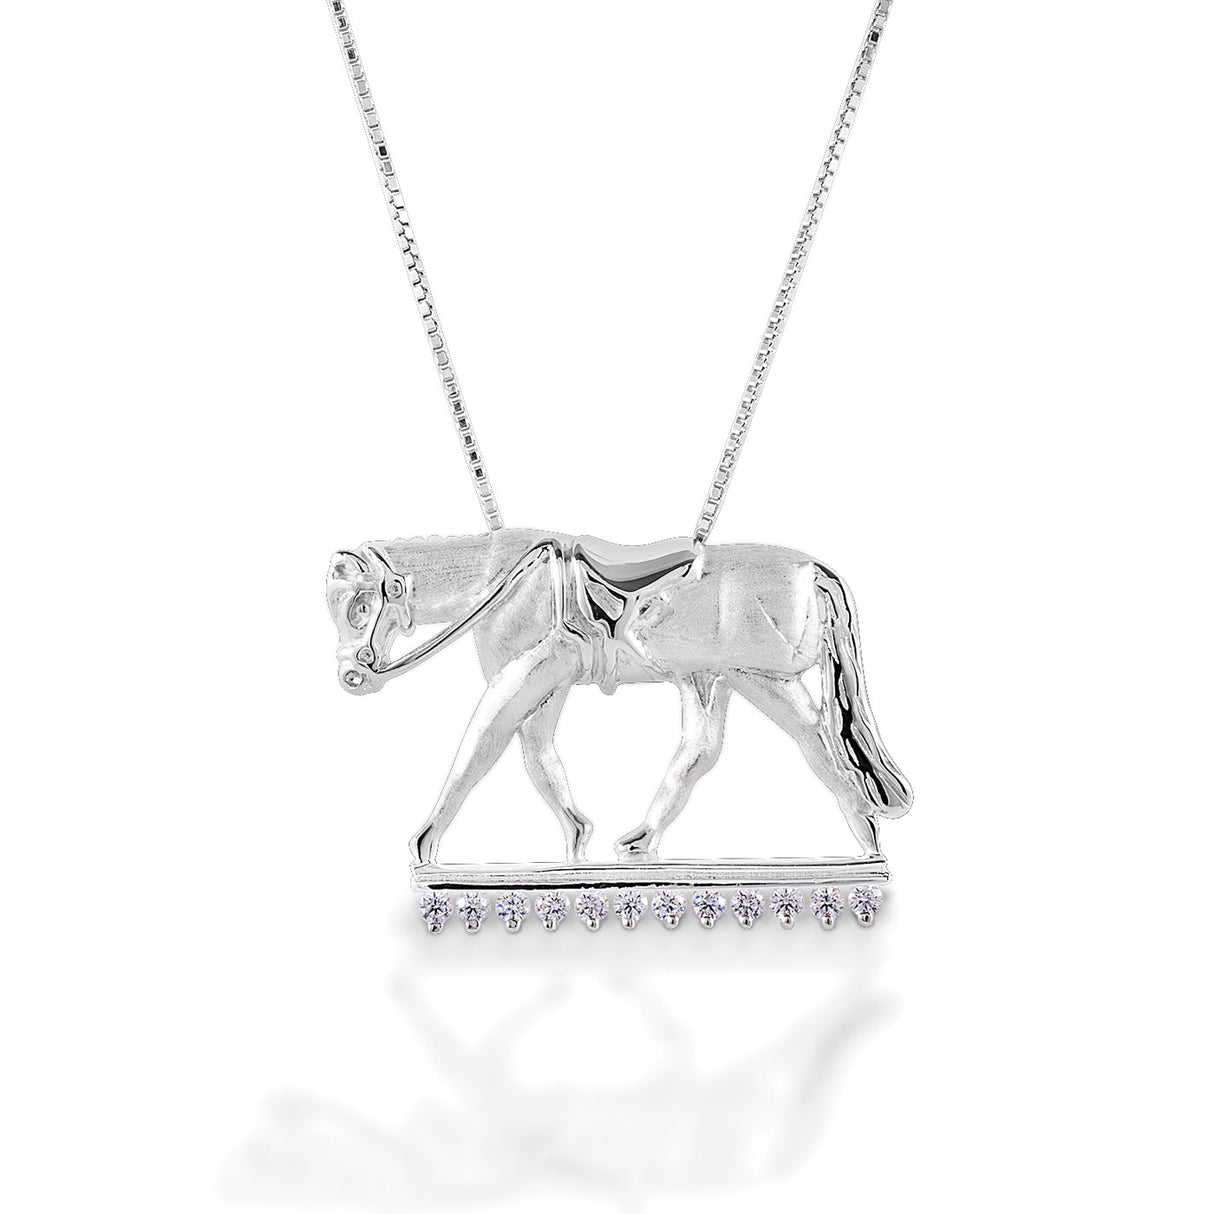 Kelly Herd English Horse Necklace